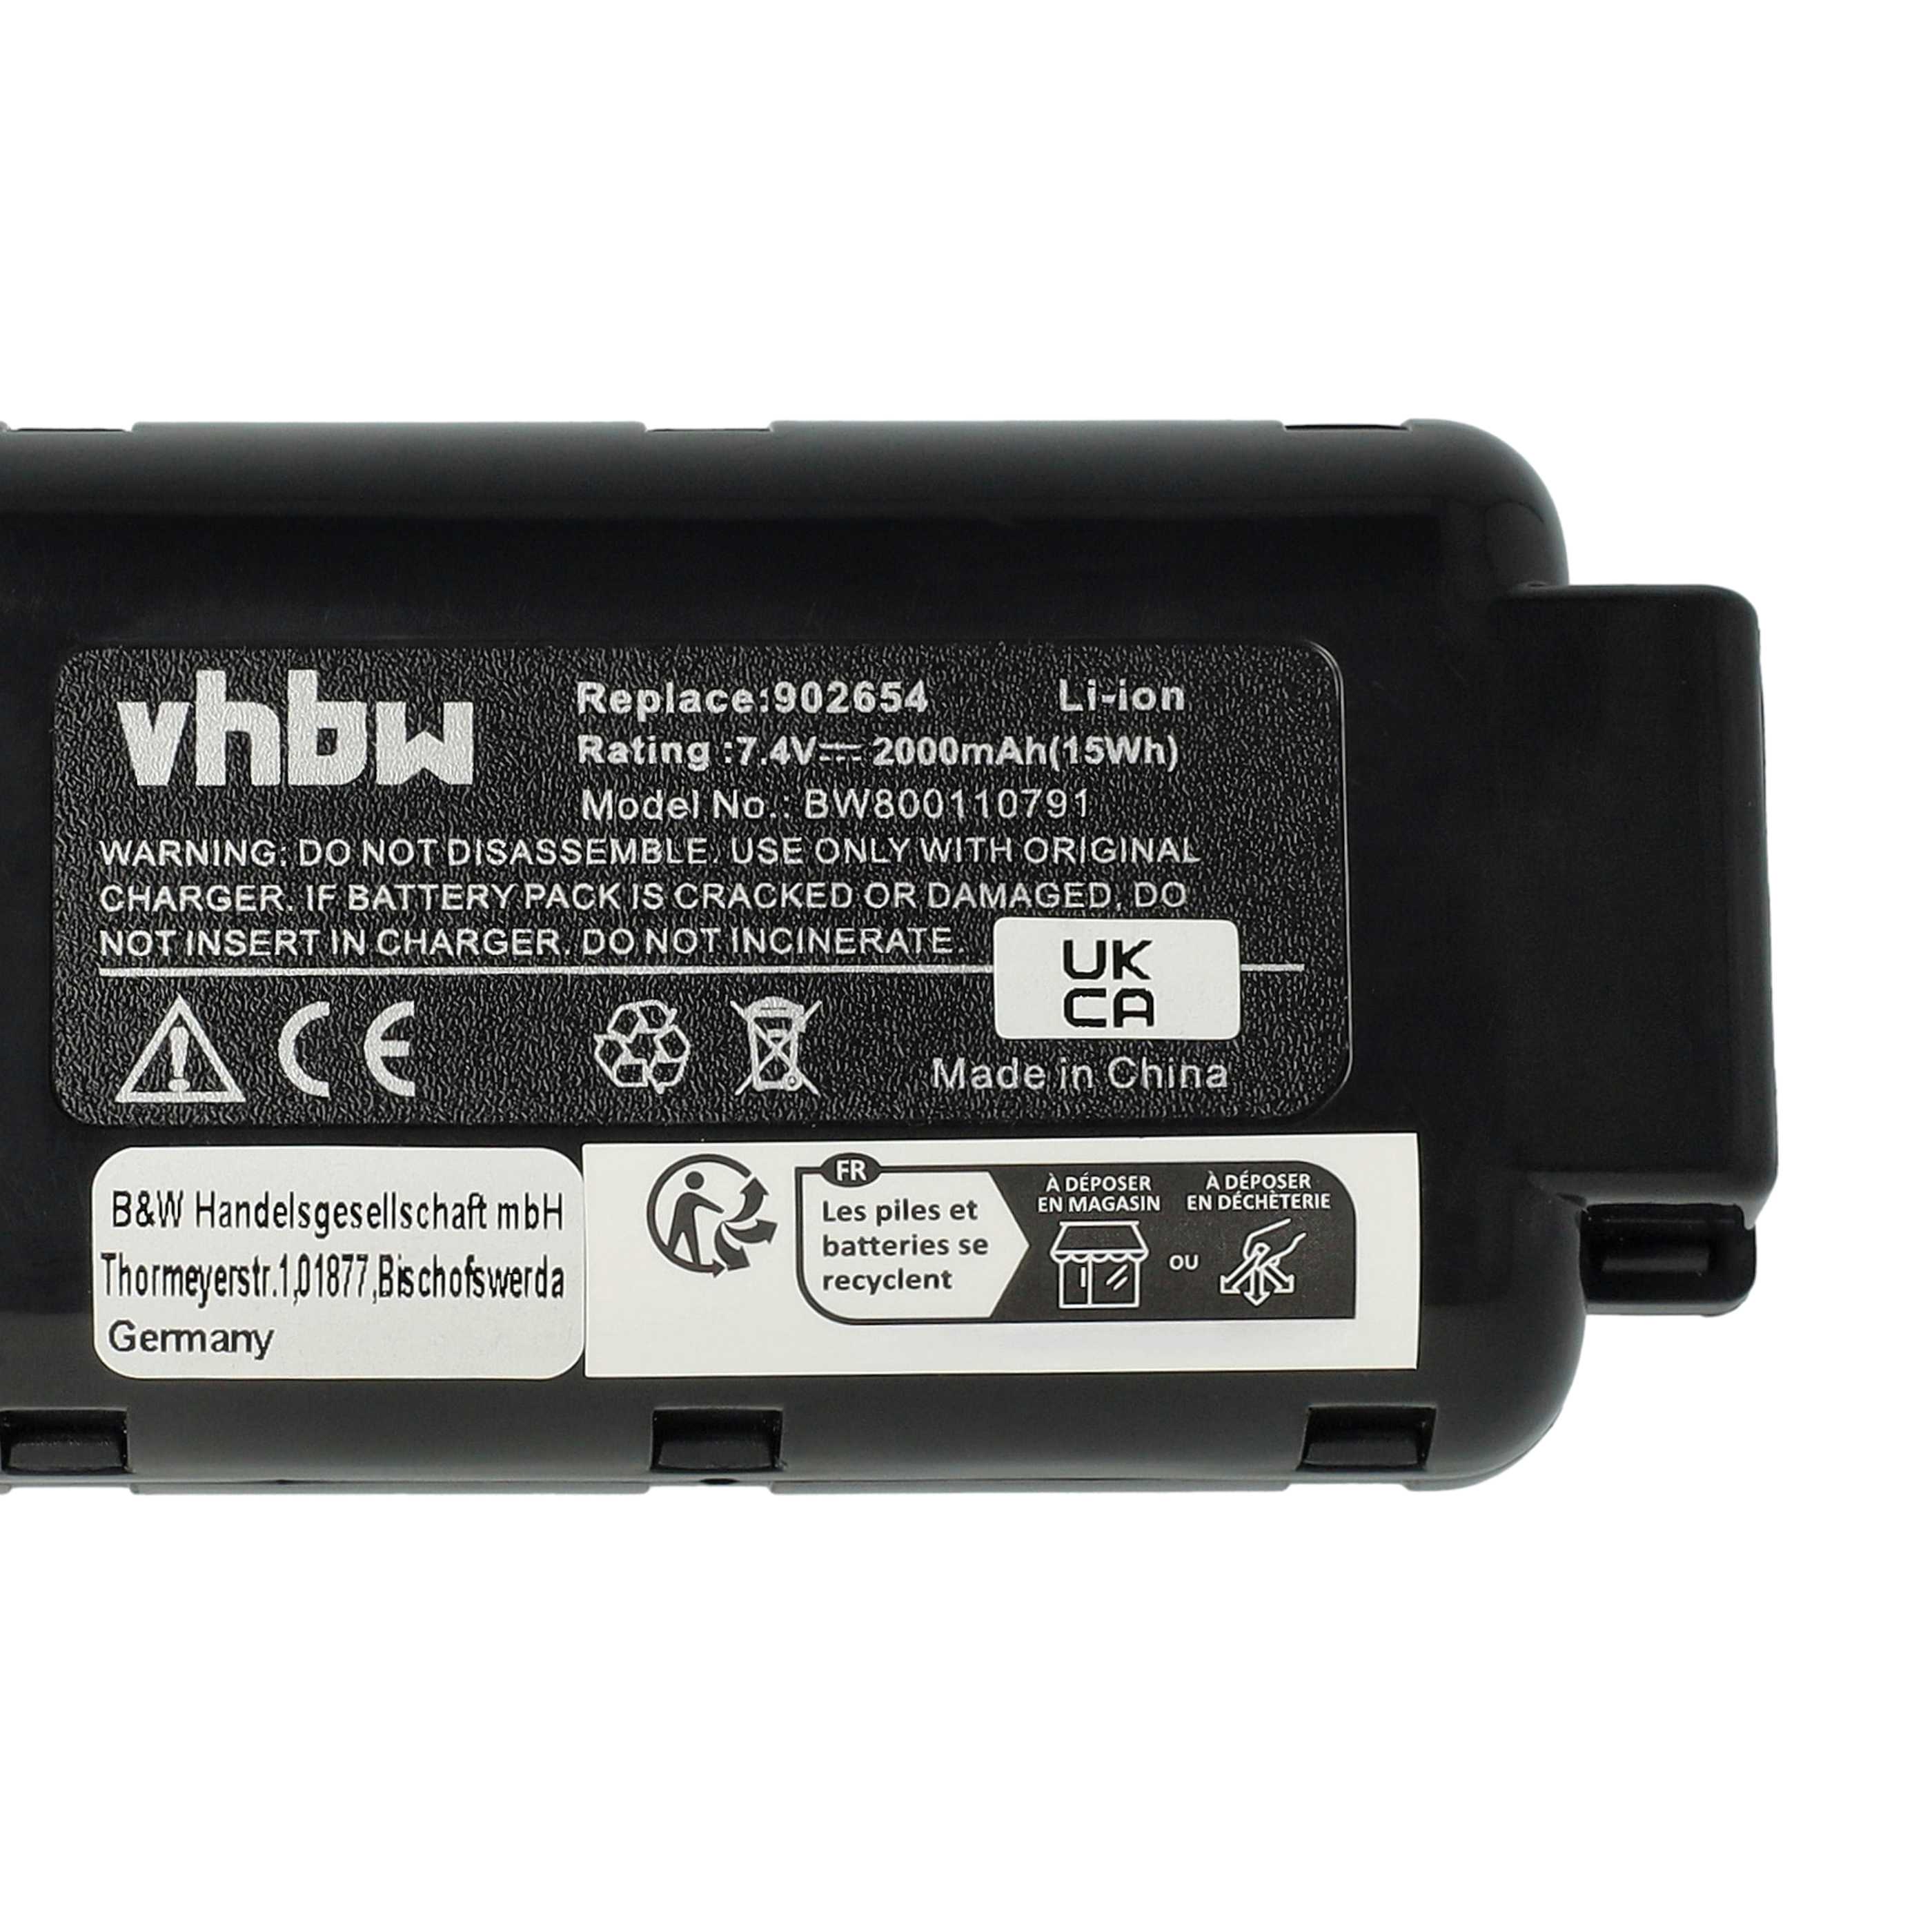 Electric Power Tool Battery Replaces Paslode 902400, 902600, 018880, 404400, 404717 - 2000 mAh, 7.4 V, Li-Ion